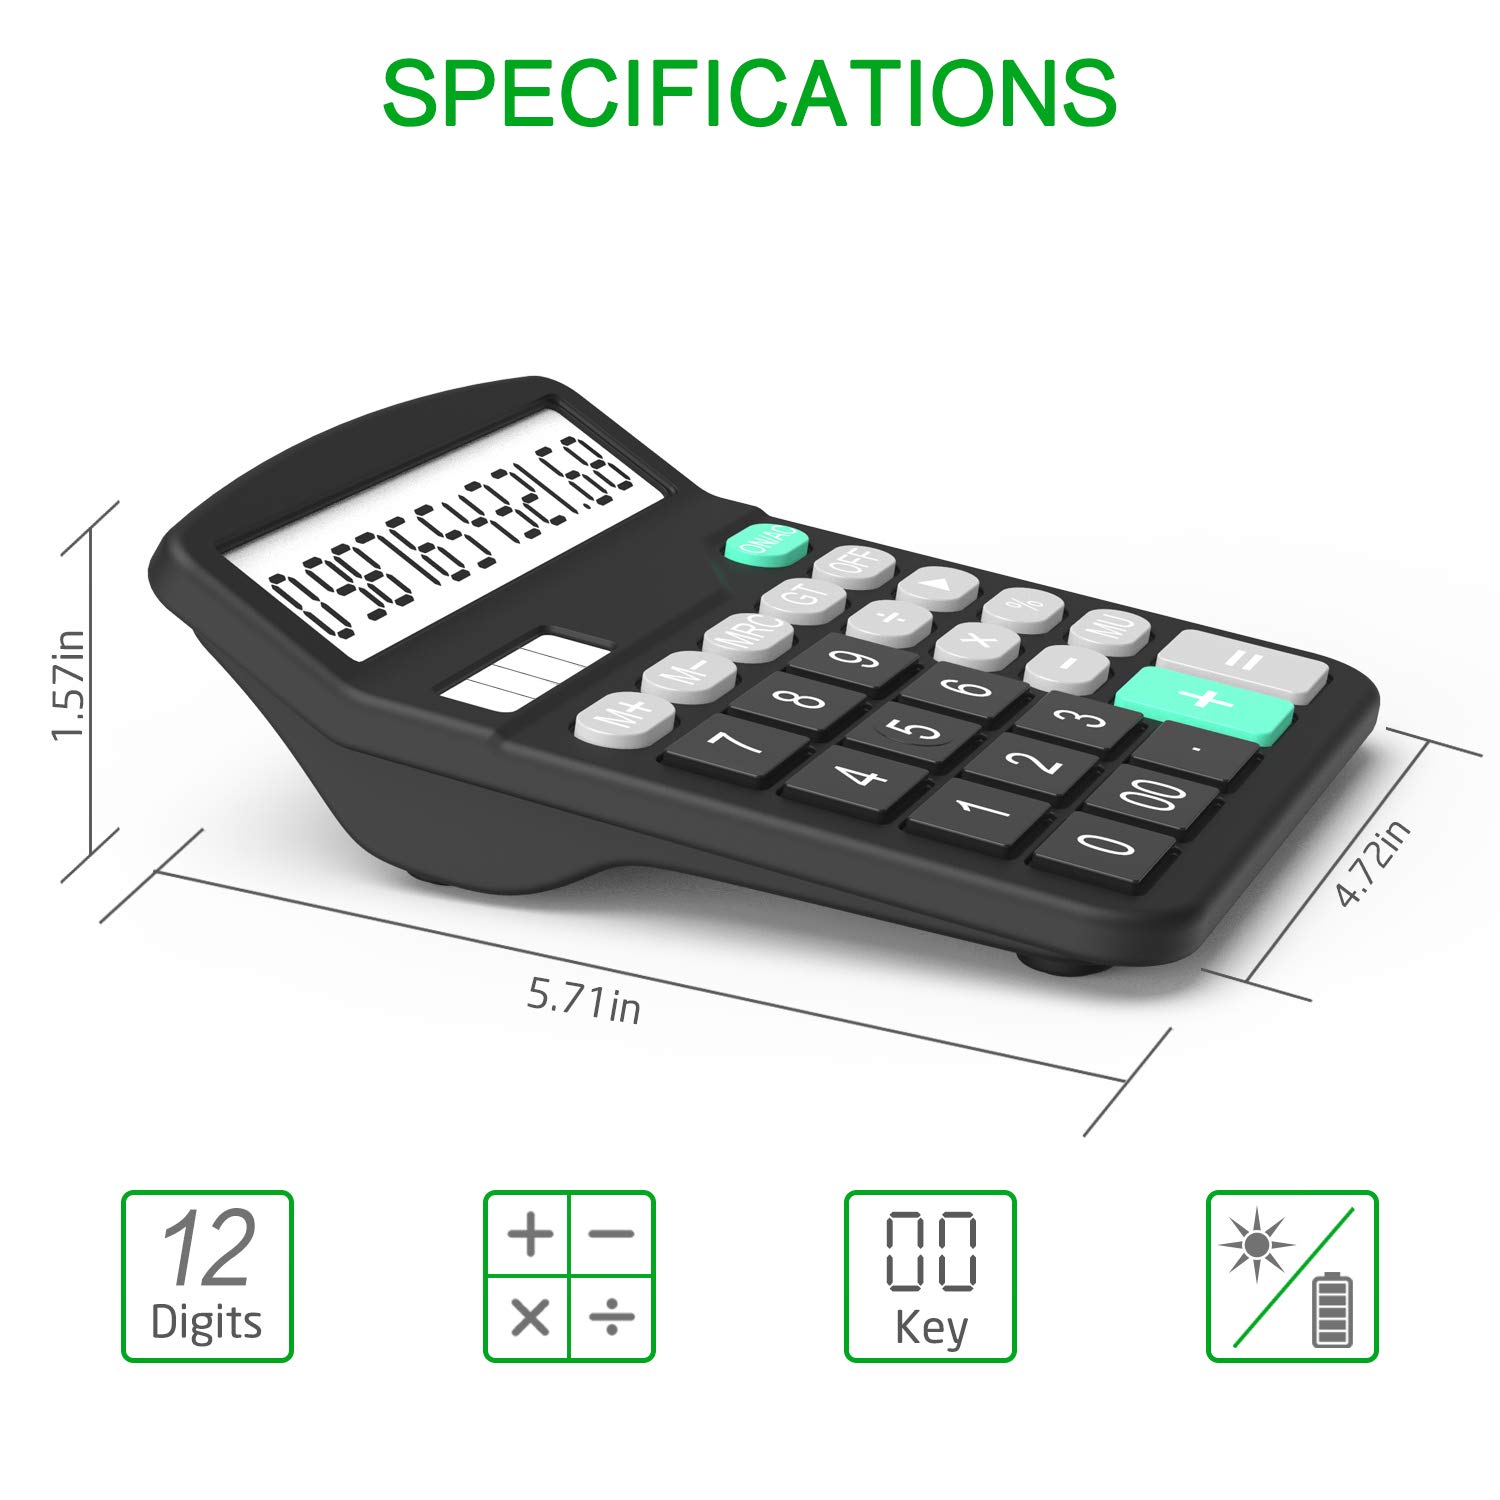 Calculator, Splaks 2 Pack Standard Functional Desktop Calculators Solar and AA Battery Dual Power Electronic Office Calculators with 12-Digit Large Display (1 Basic Black&1 Updated Silver)